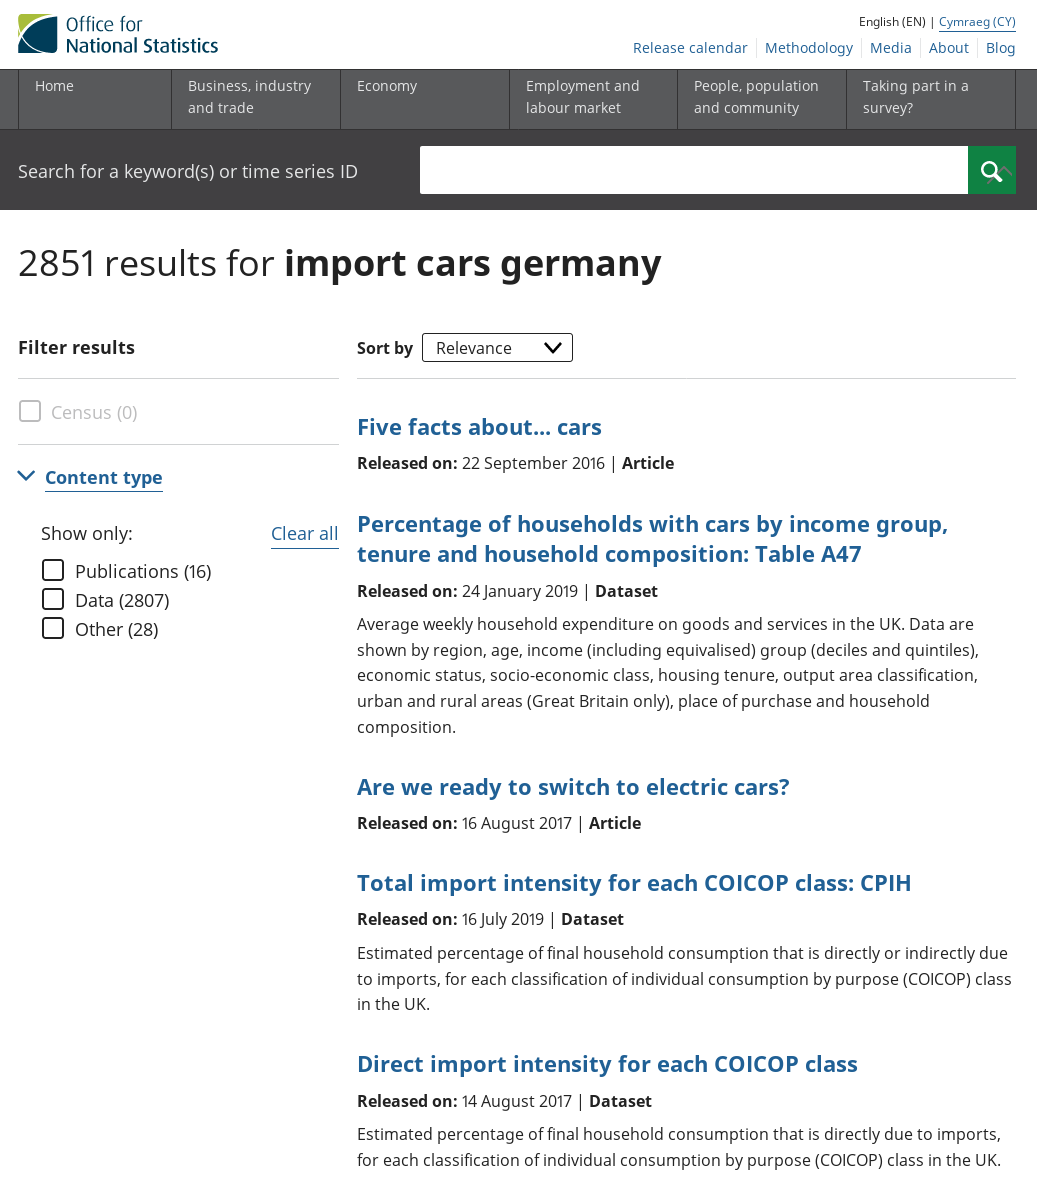 A search for "cars import Germany" on the ONS beta search engine returns results like "Five facts about... cars" "Percentage of households with cars" "Are we ready to switch to electric cars"